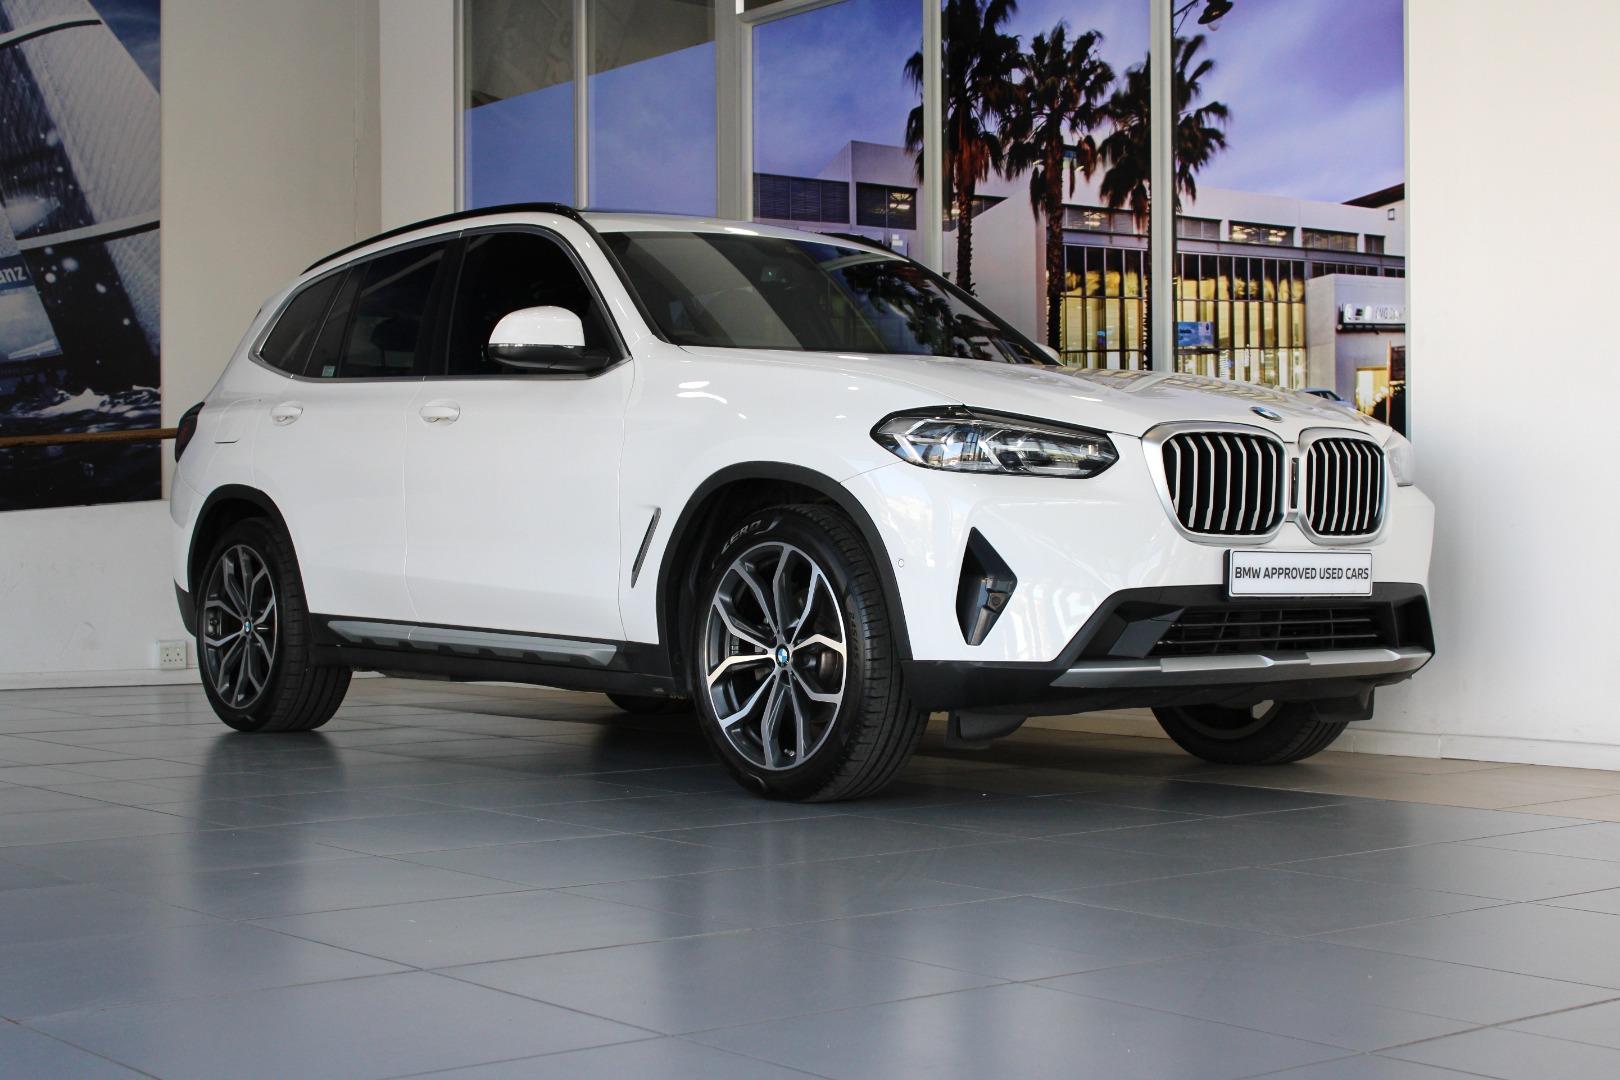 2022 BMW X3 XDRIVE 20D (G01)  for sale - SMG12|USED|115169